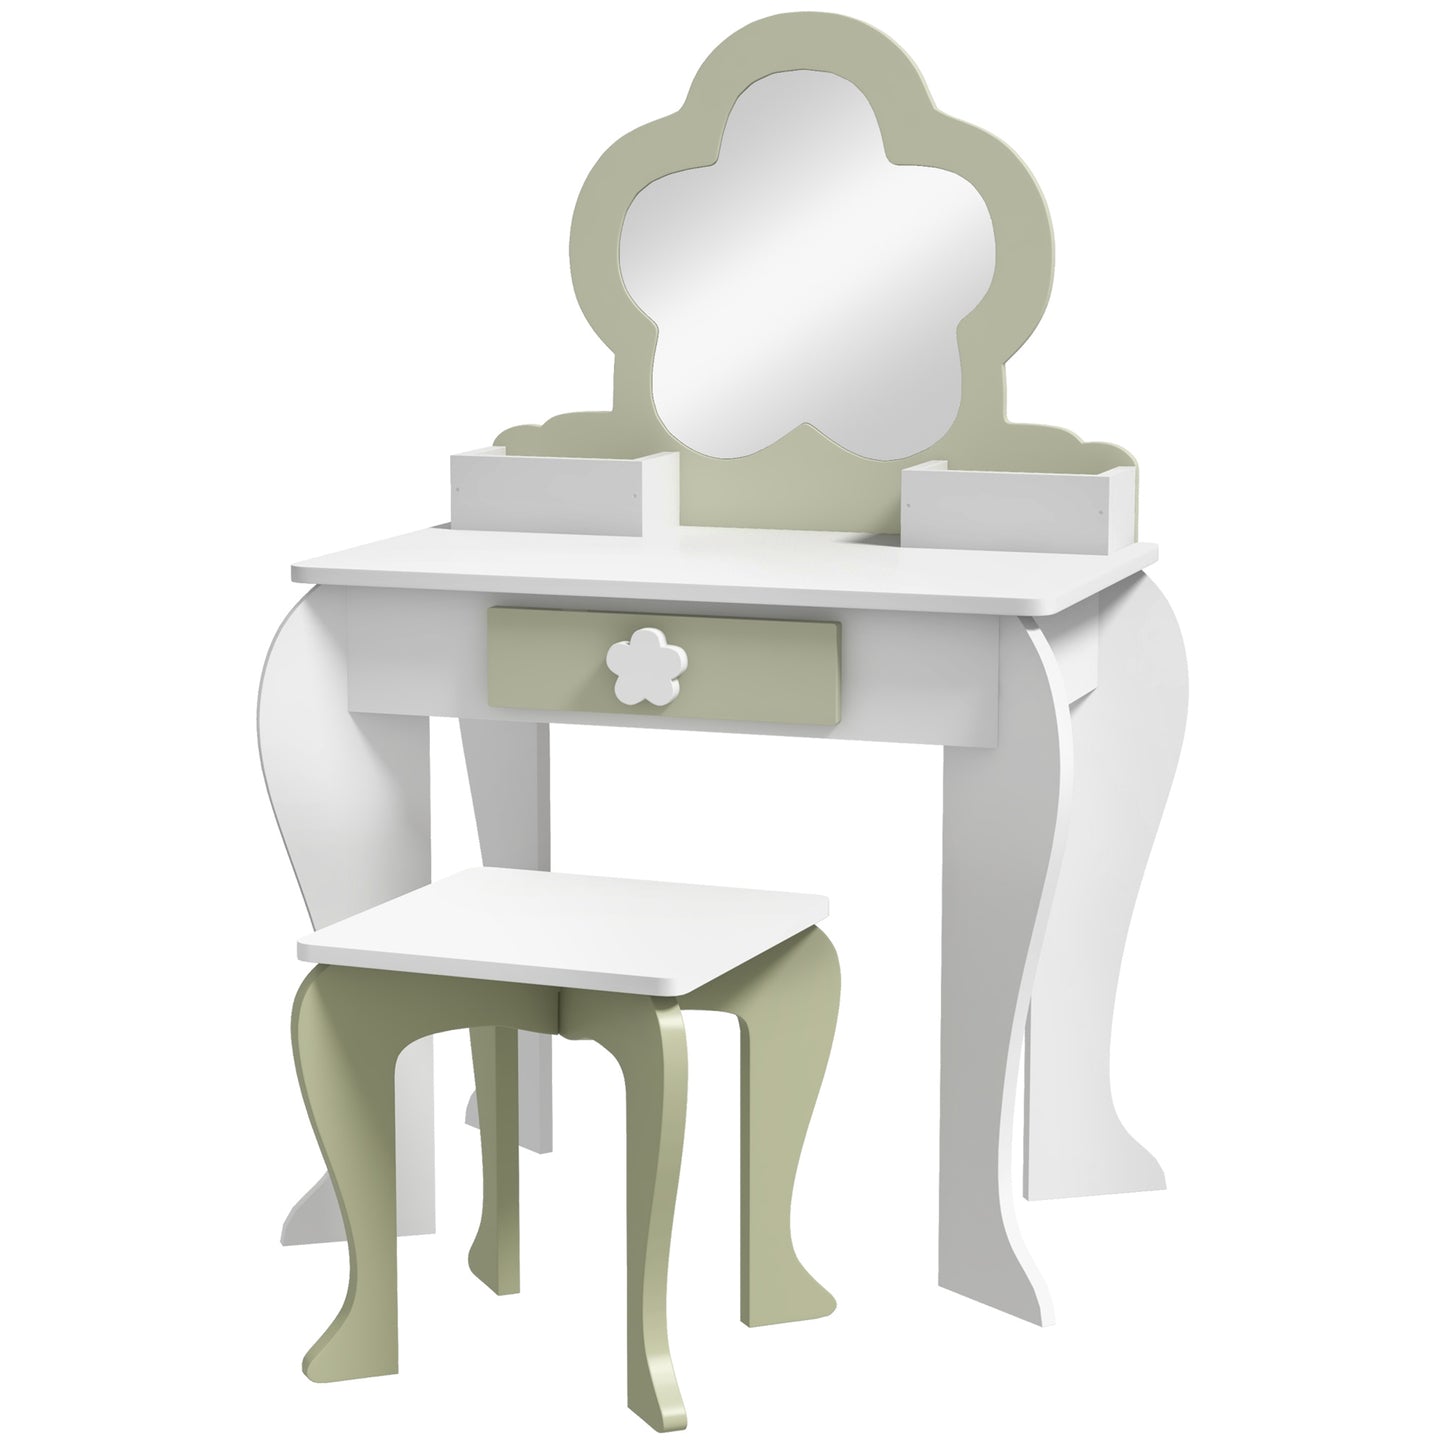 ZONEKIZ Kids Vanity Table with Mirror and Stool Drawer Storage Boxes Beauty Flower Design for 36 Years Old White